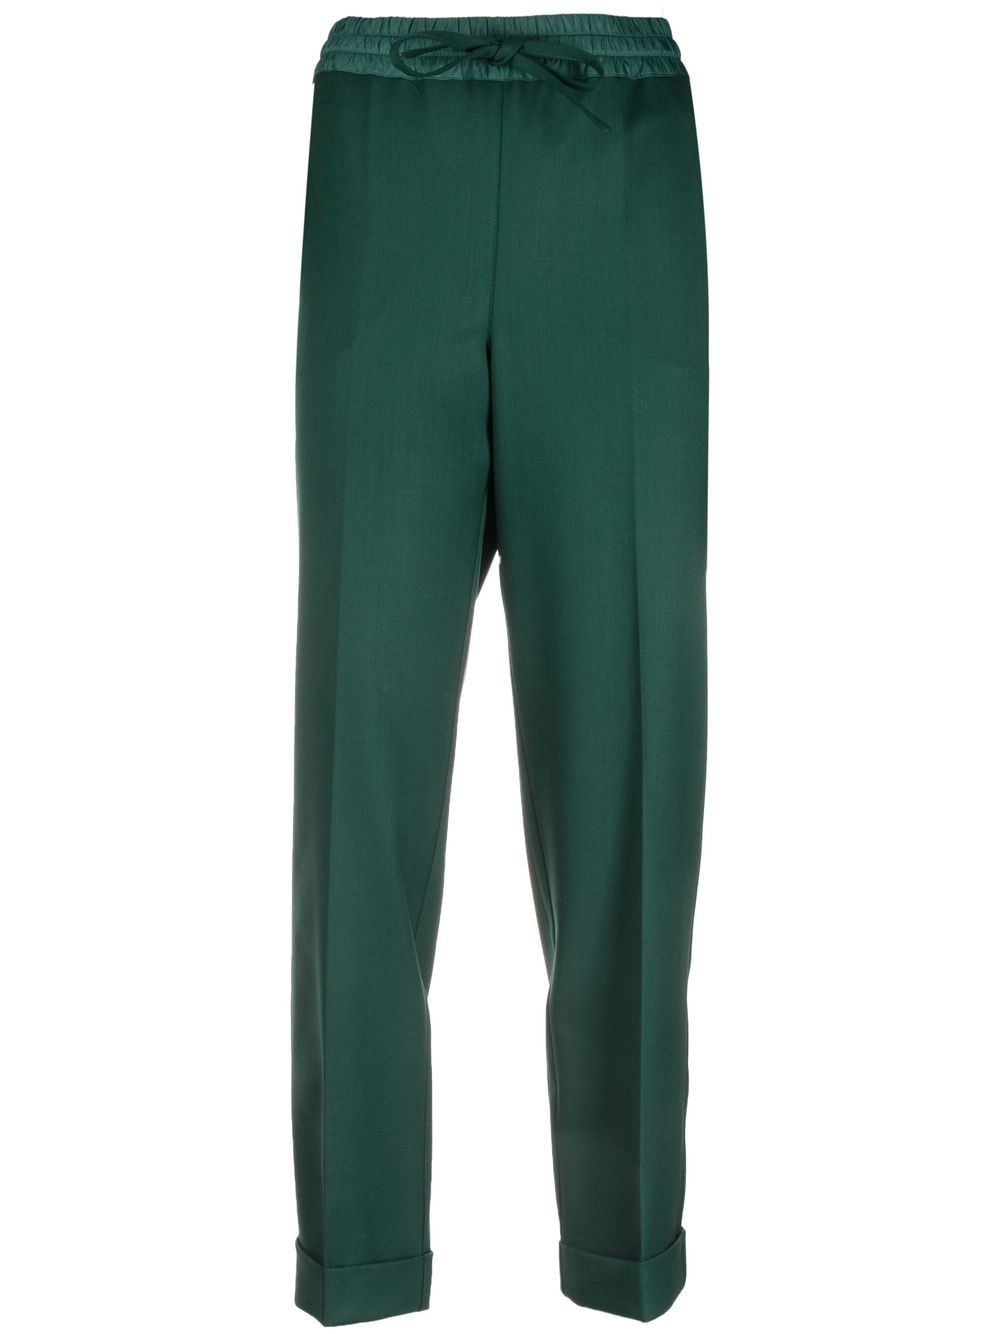 P.A.R.O.S.H. tapered drawstring wool trousers - Green von P.A.R.O.S.H.